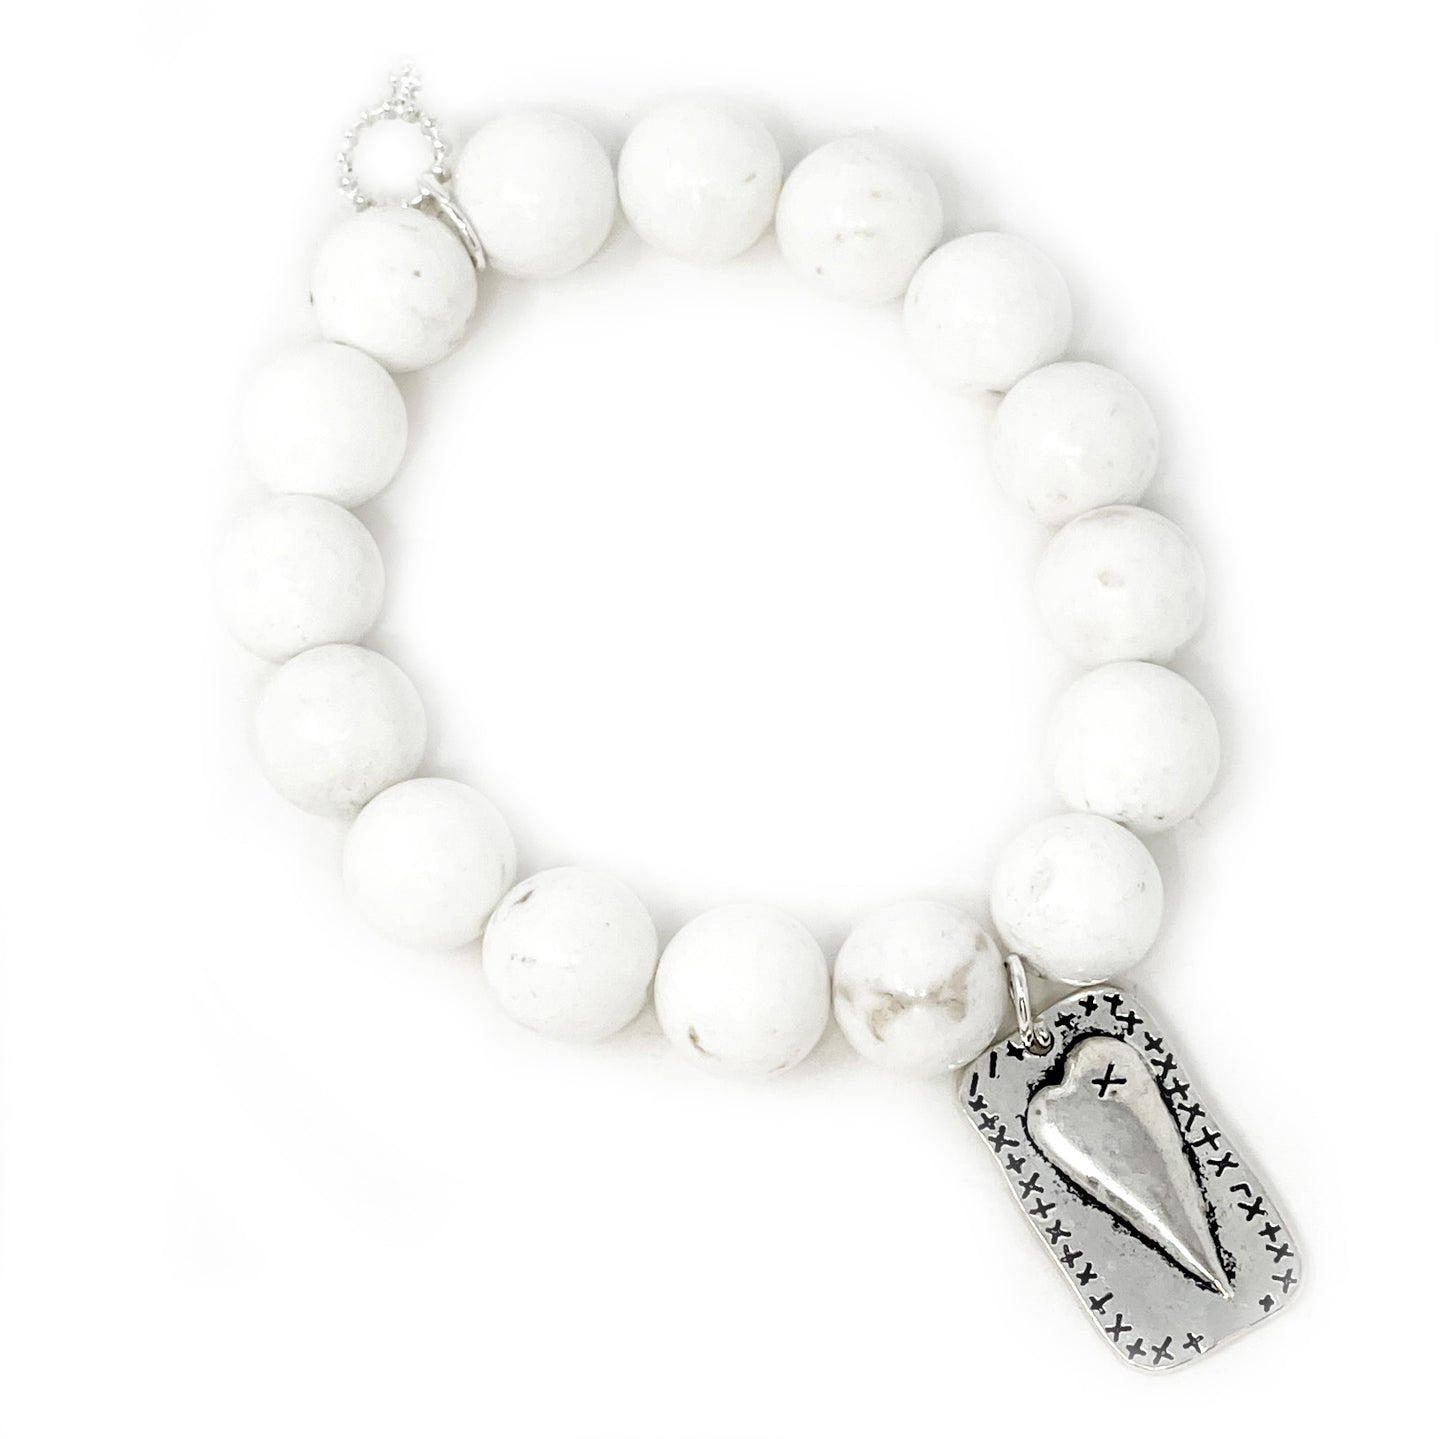 Creamy White Howlite with Silver Mended Heart